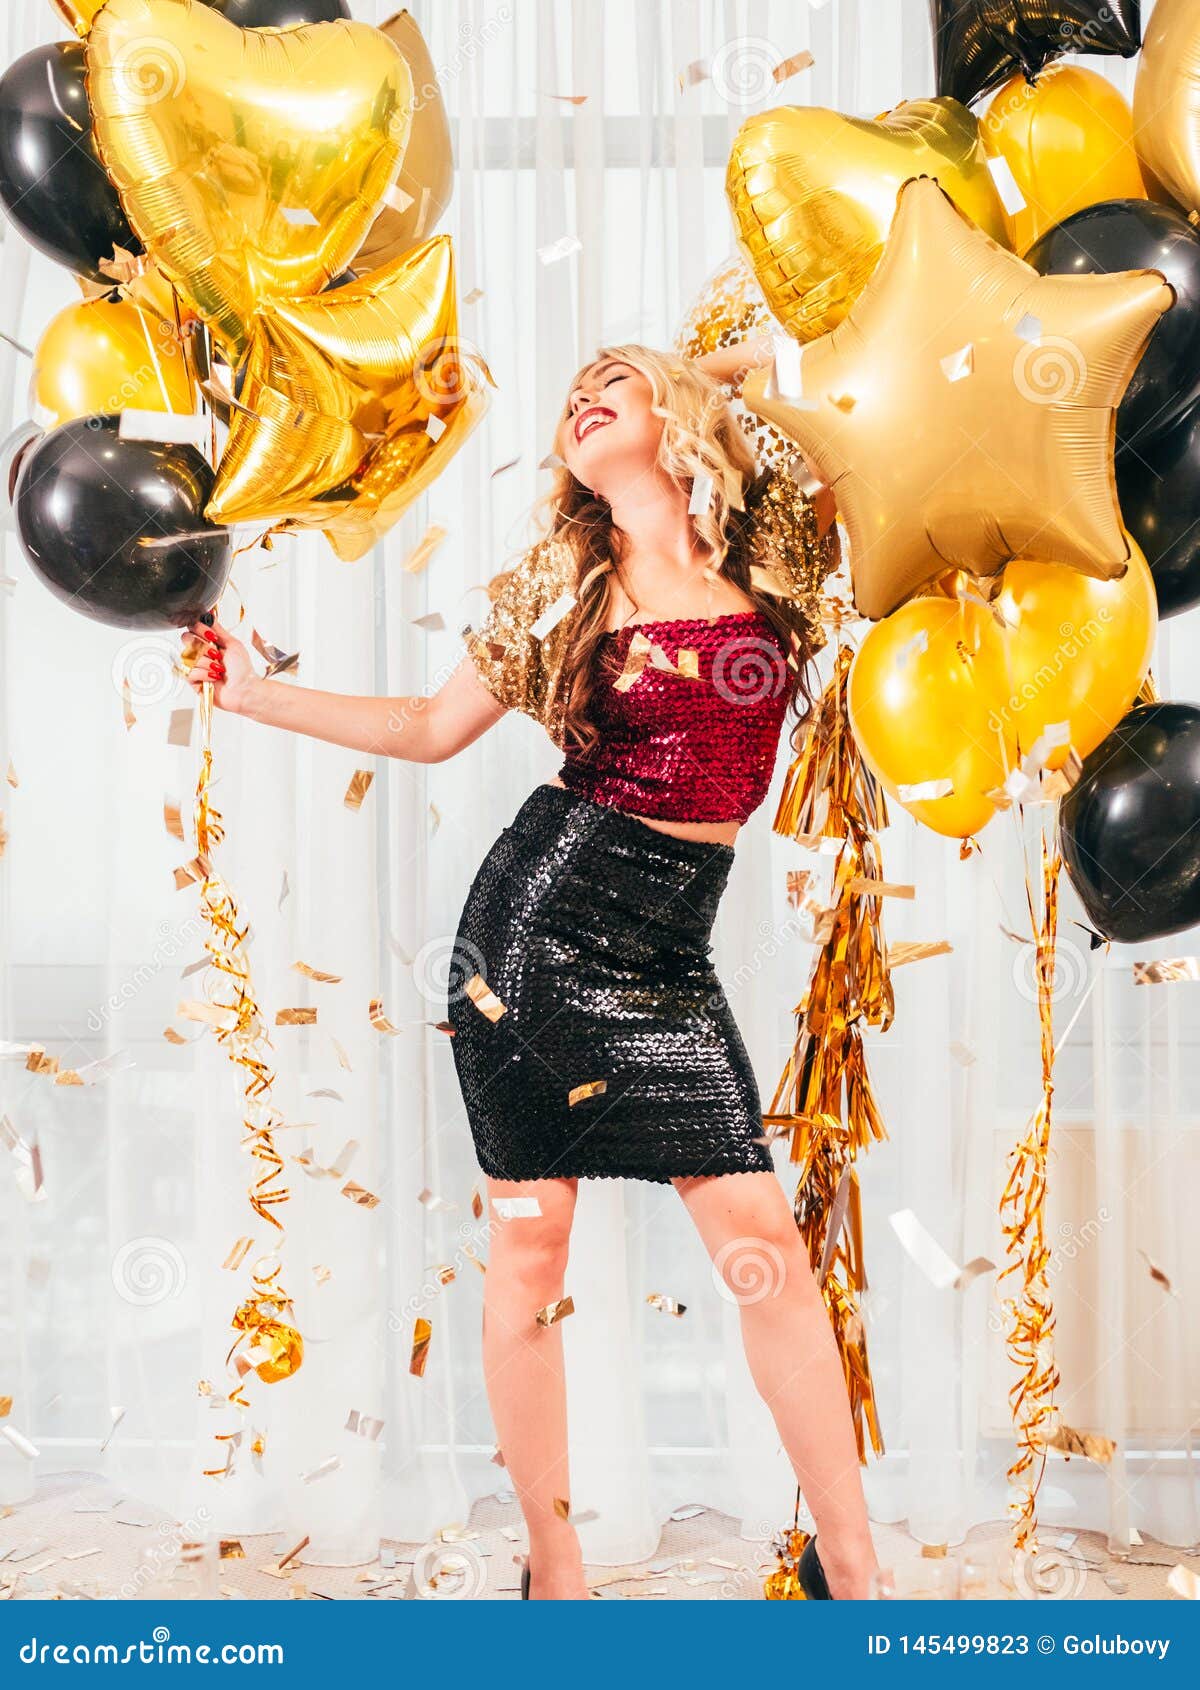 Girls Party Special Occasion Blonde Girl Balloons Stock Image - Image of  caucasian, posh: 145499823